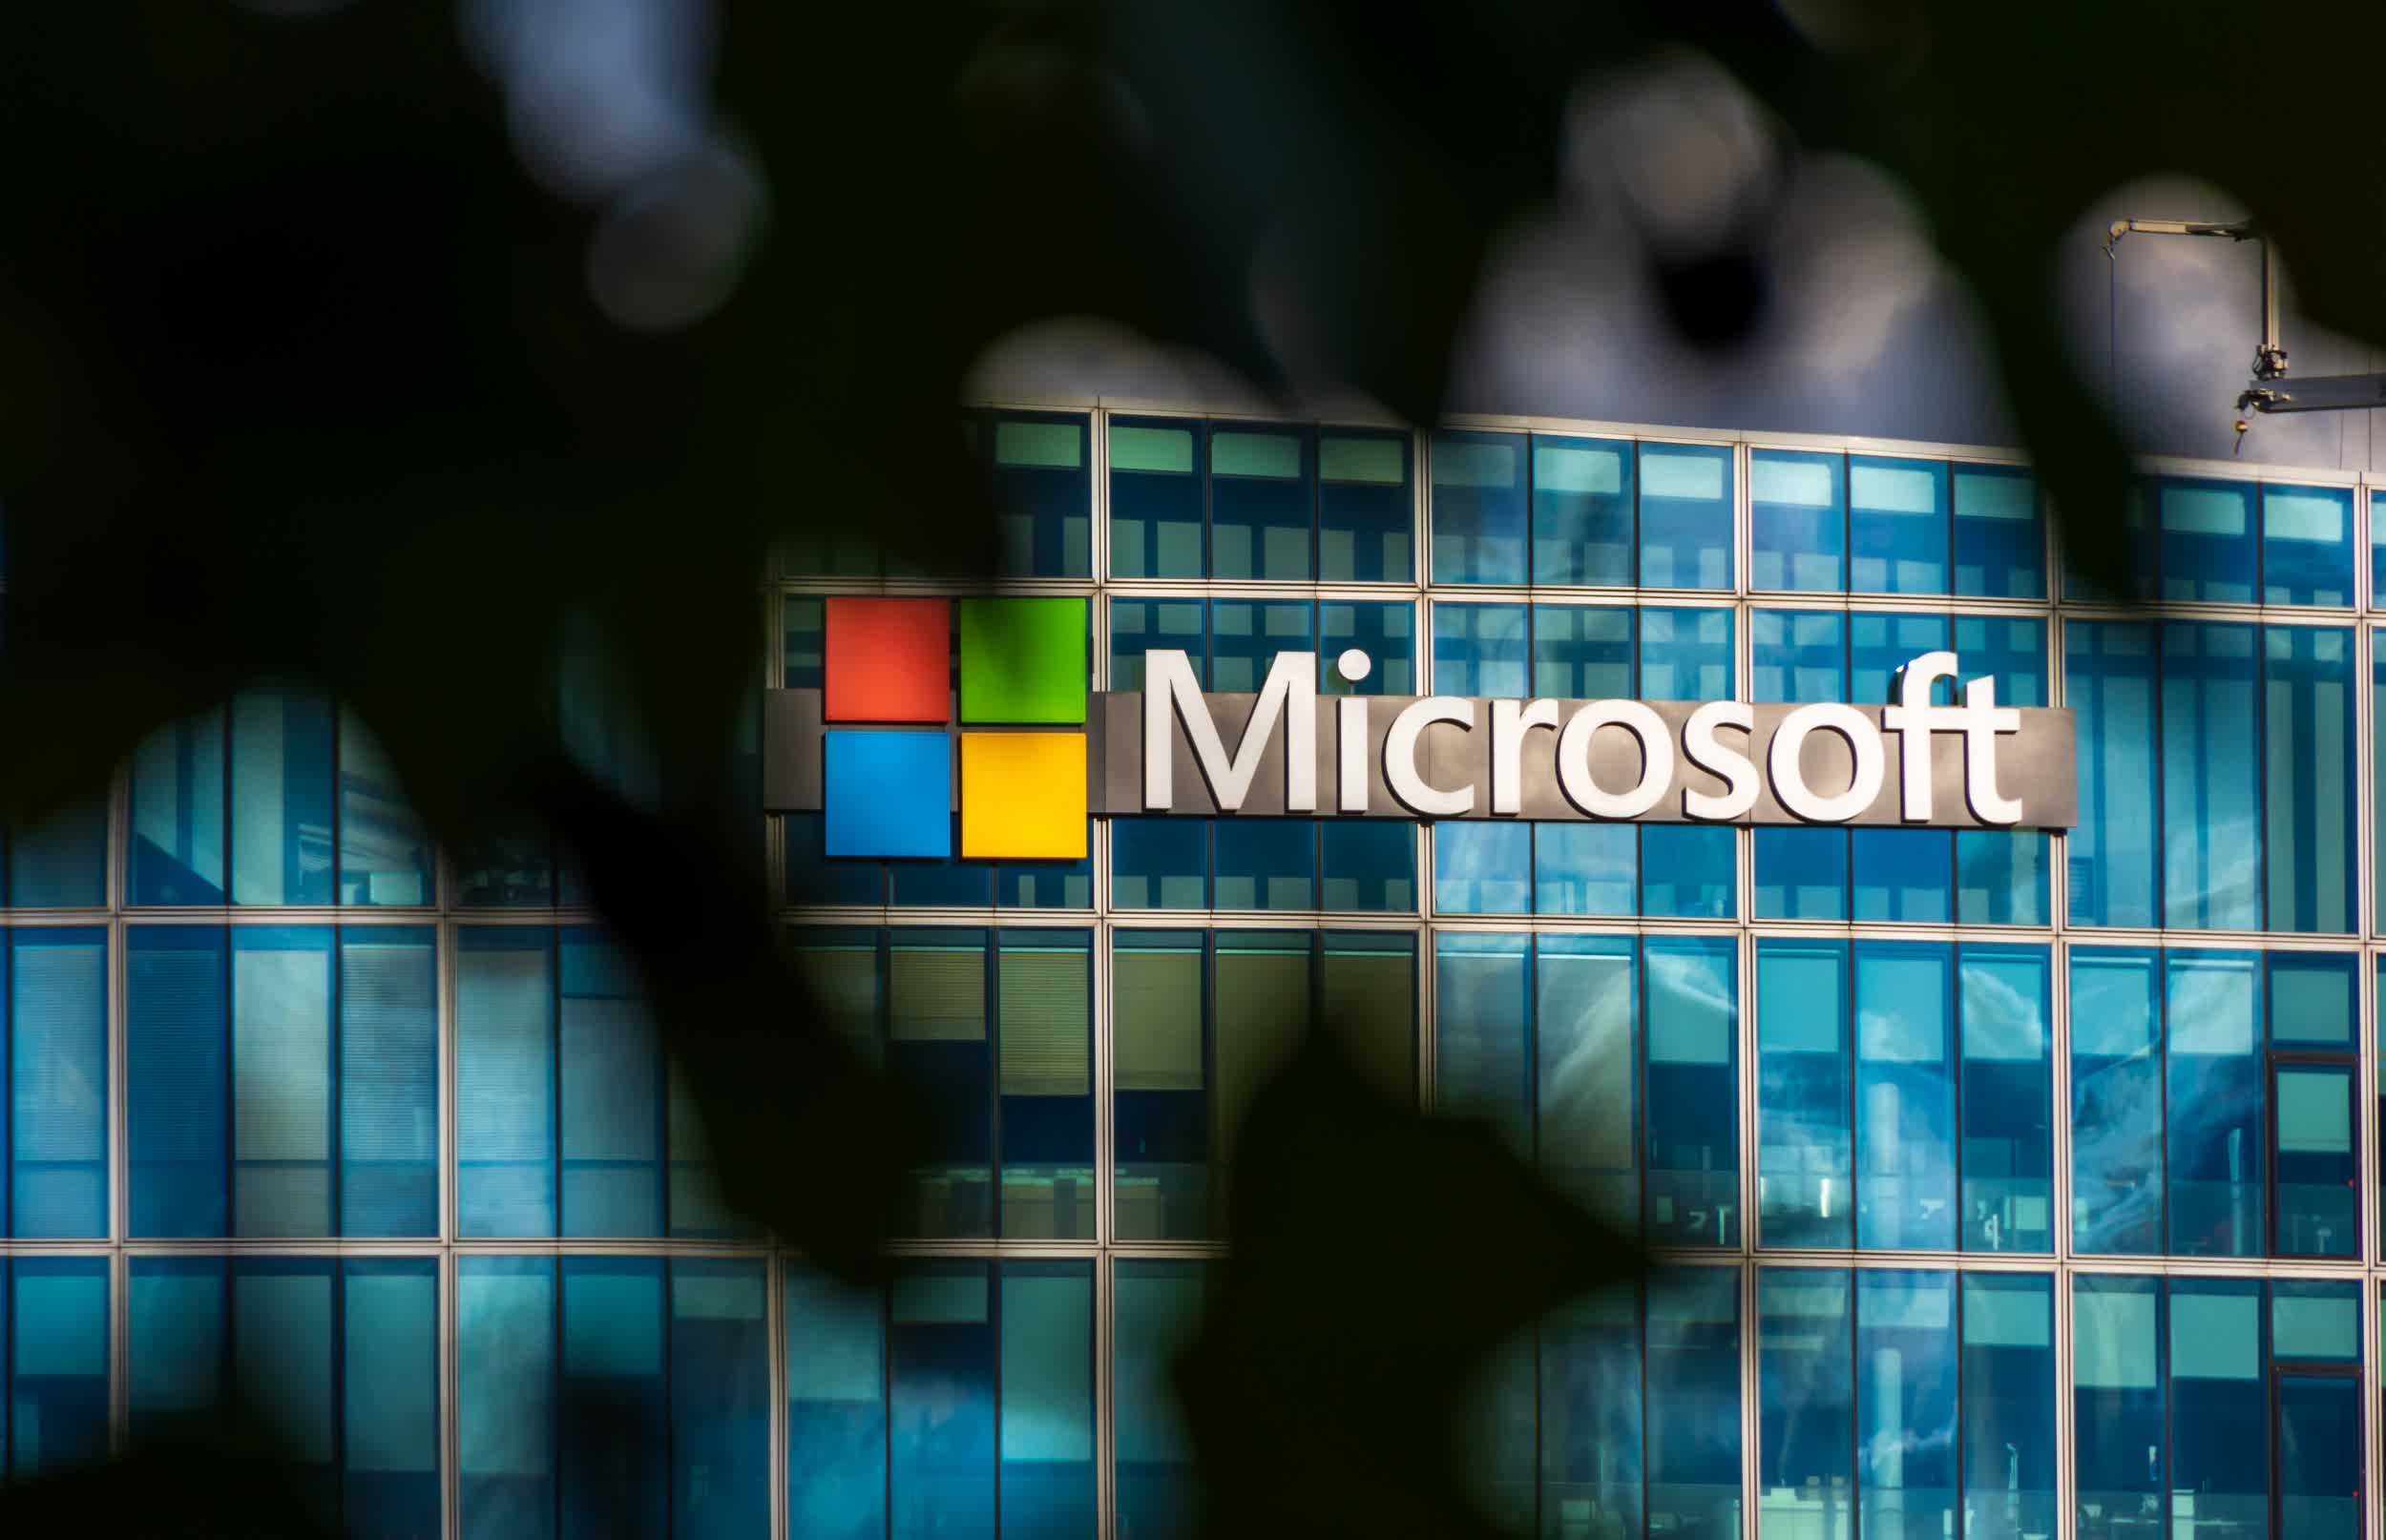 Some Microsoft employees slept in data centers during pandemic to avoid lockdown